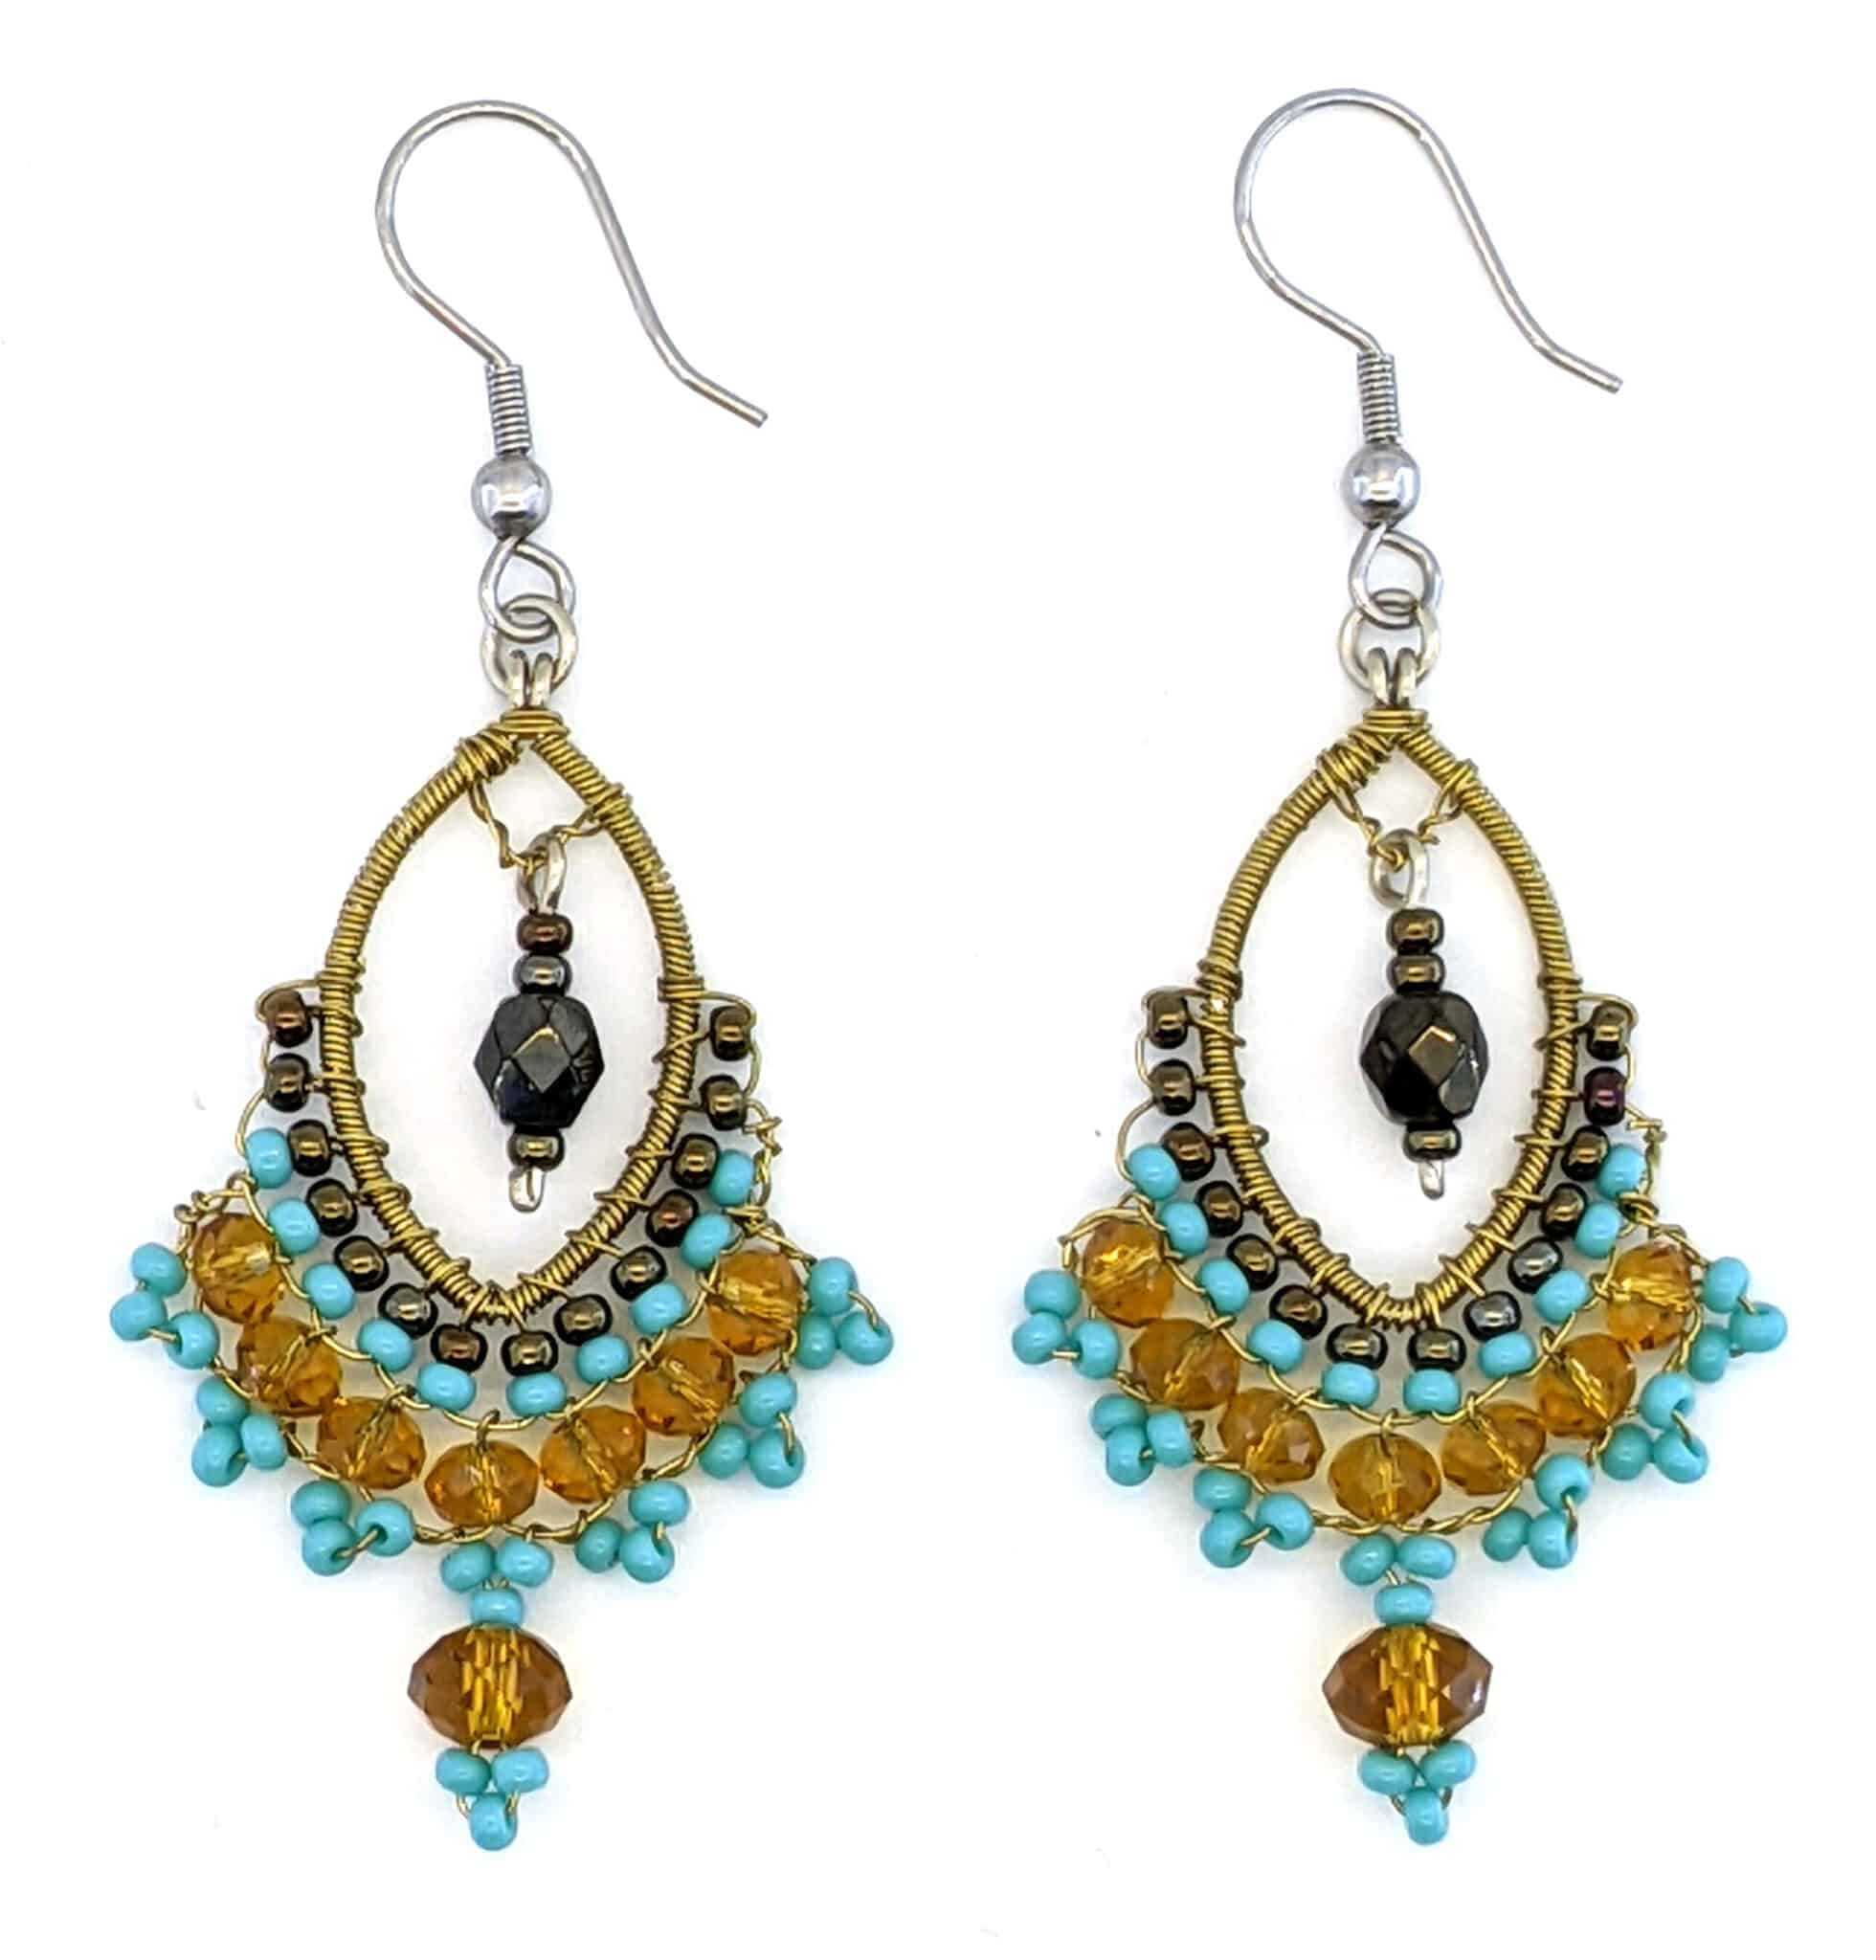 Turquoise, Bronze and Gold Catarina Beaded Earrings